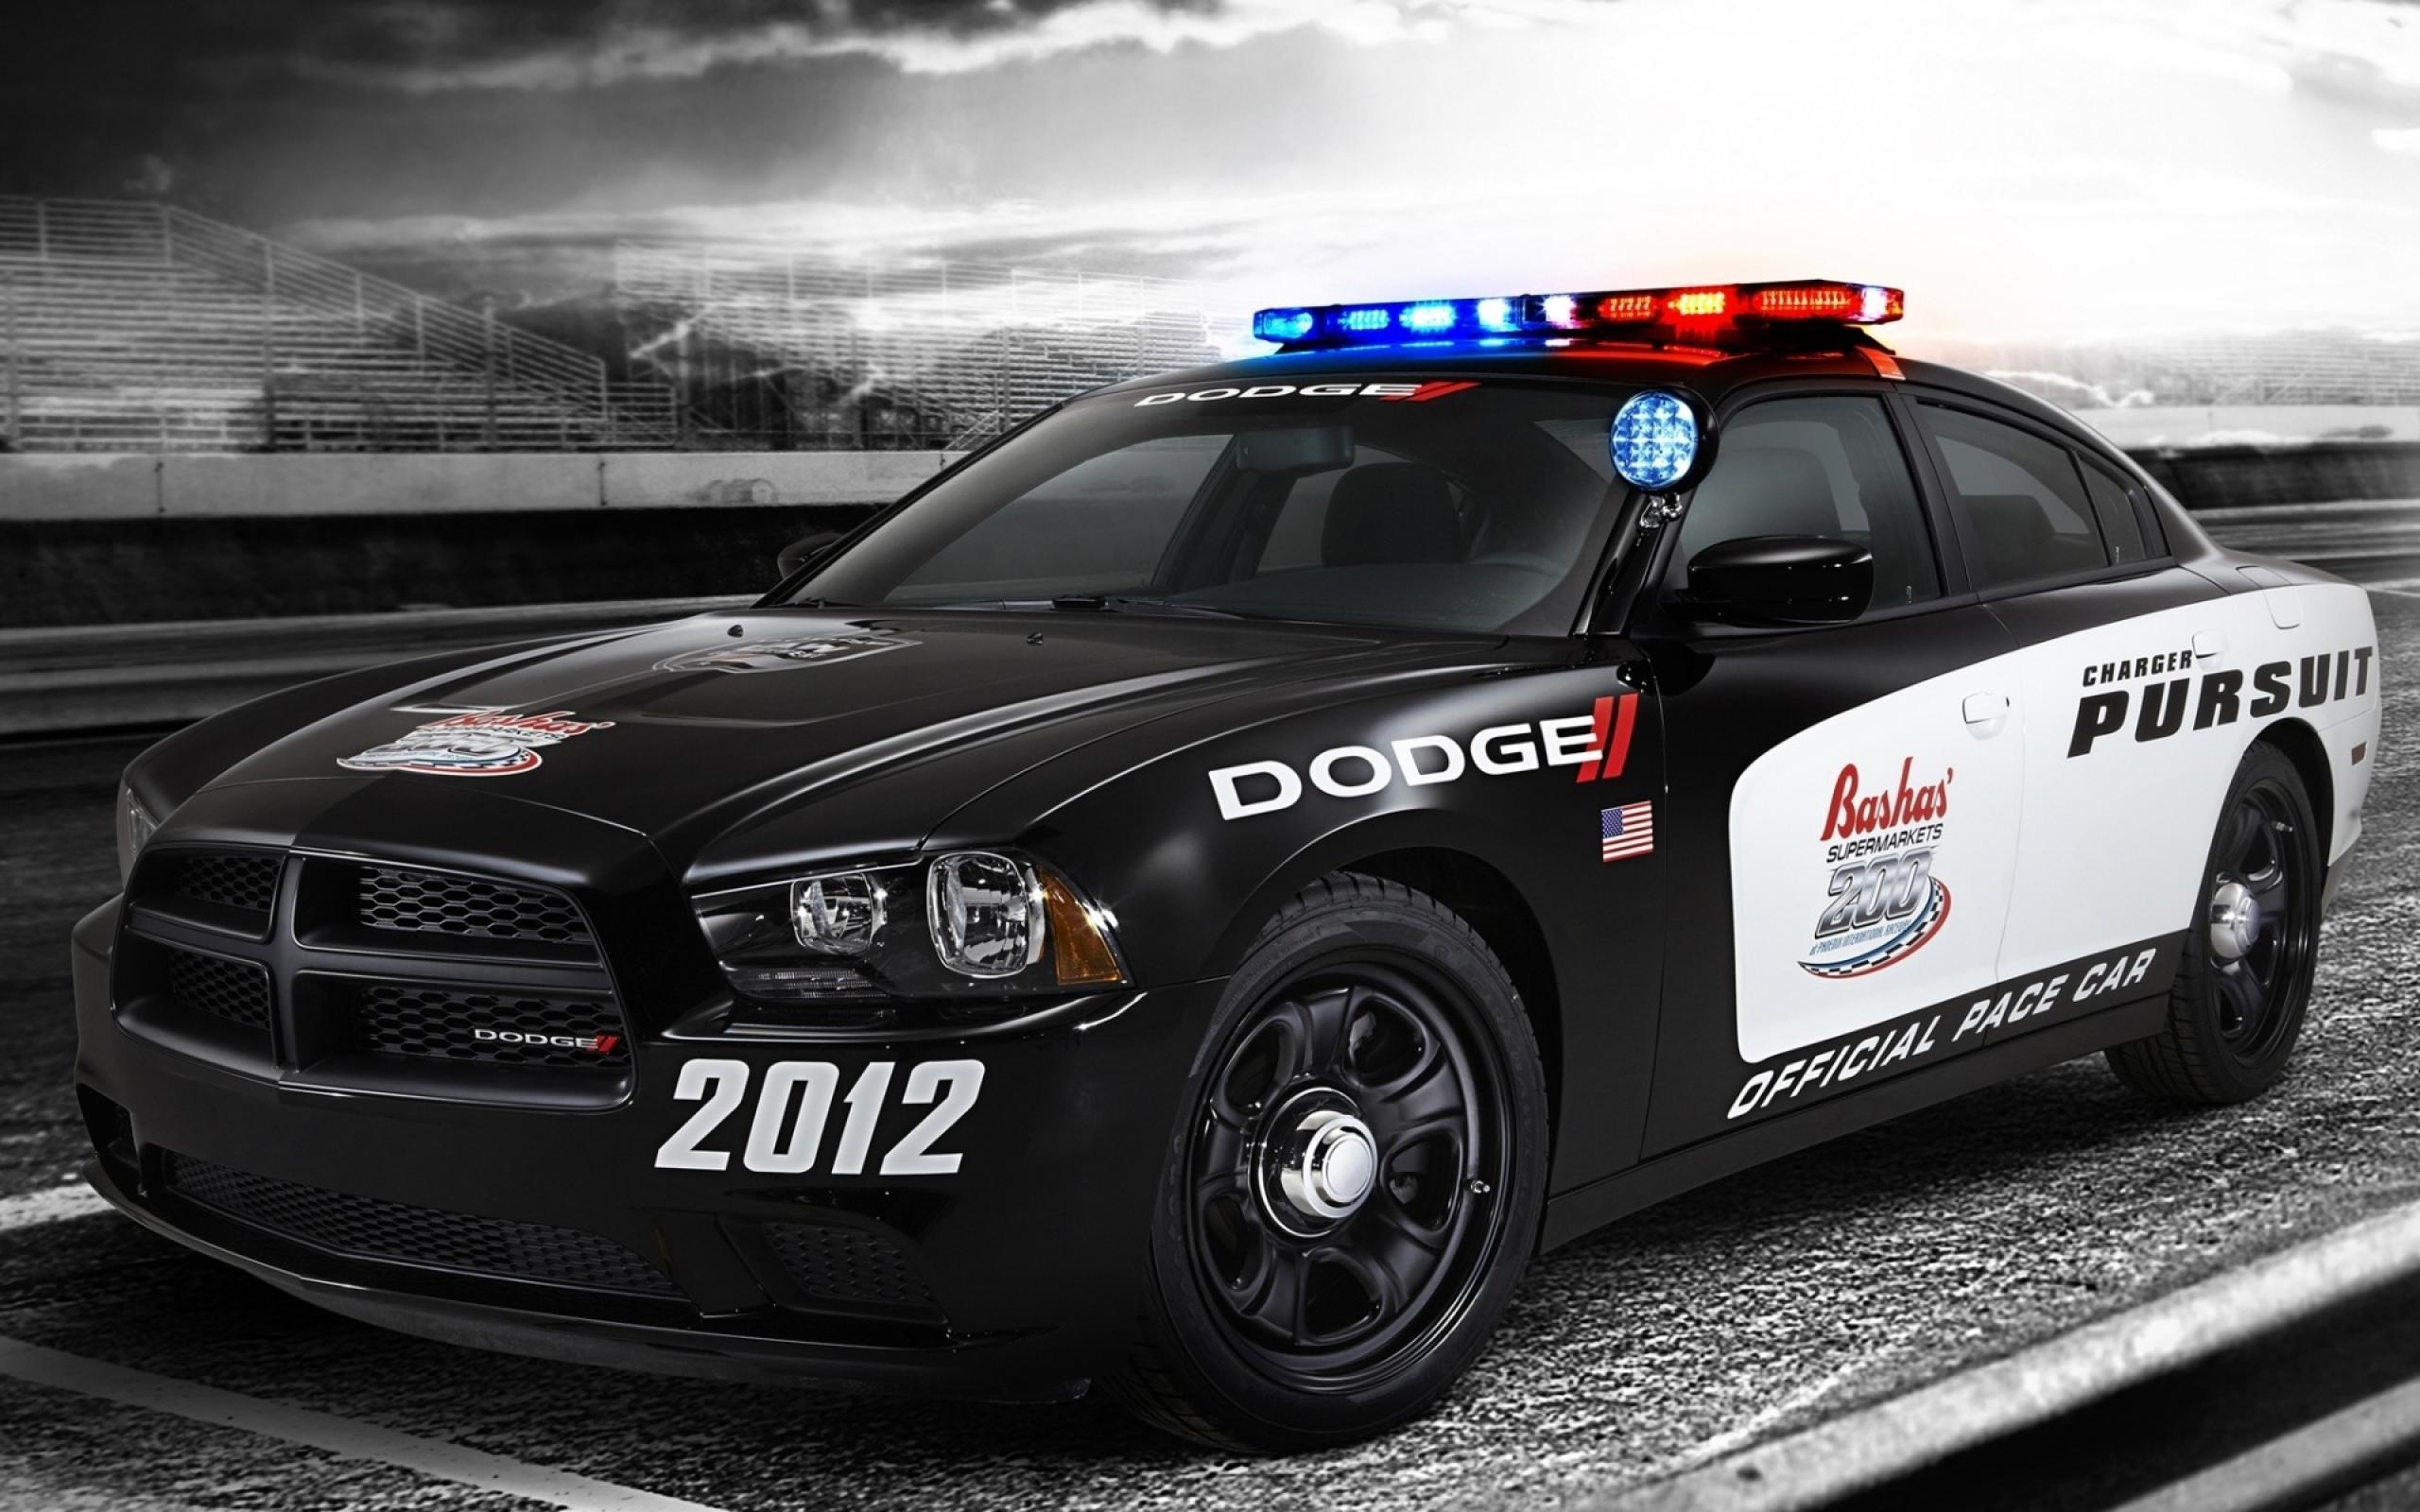 Police Car Photos Download The BEST Free Police Car Stock Photos  HD  Images